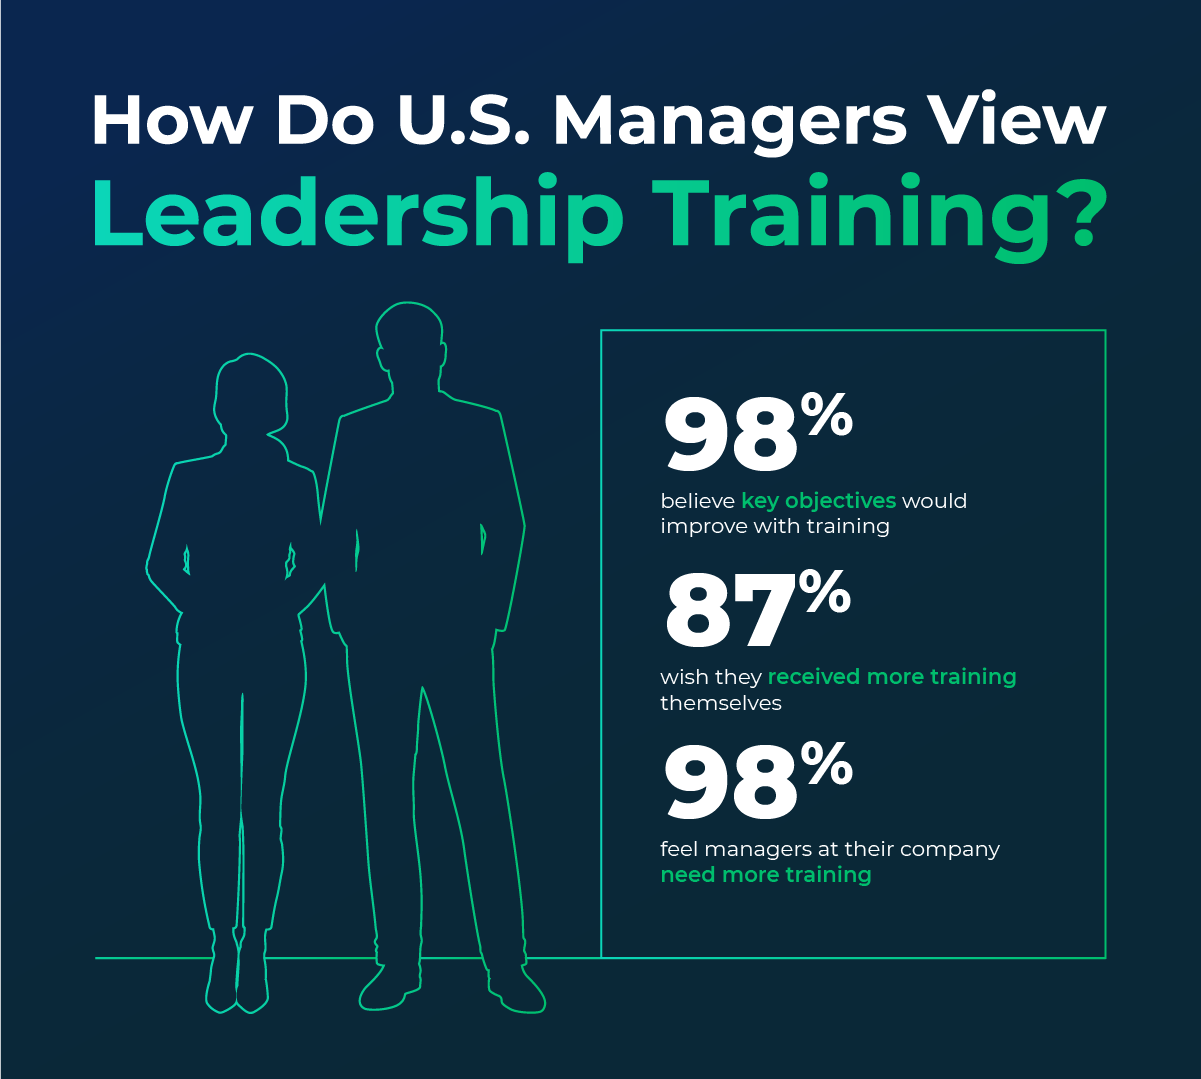 Graphic showcasing the importance of leadership skills for managers, with 87% of survey respondents wanting more training in this area